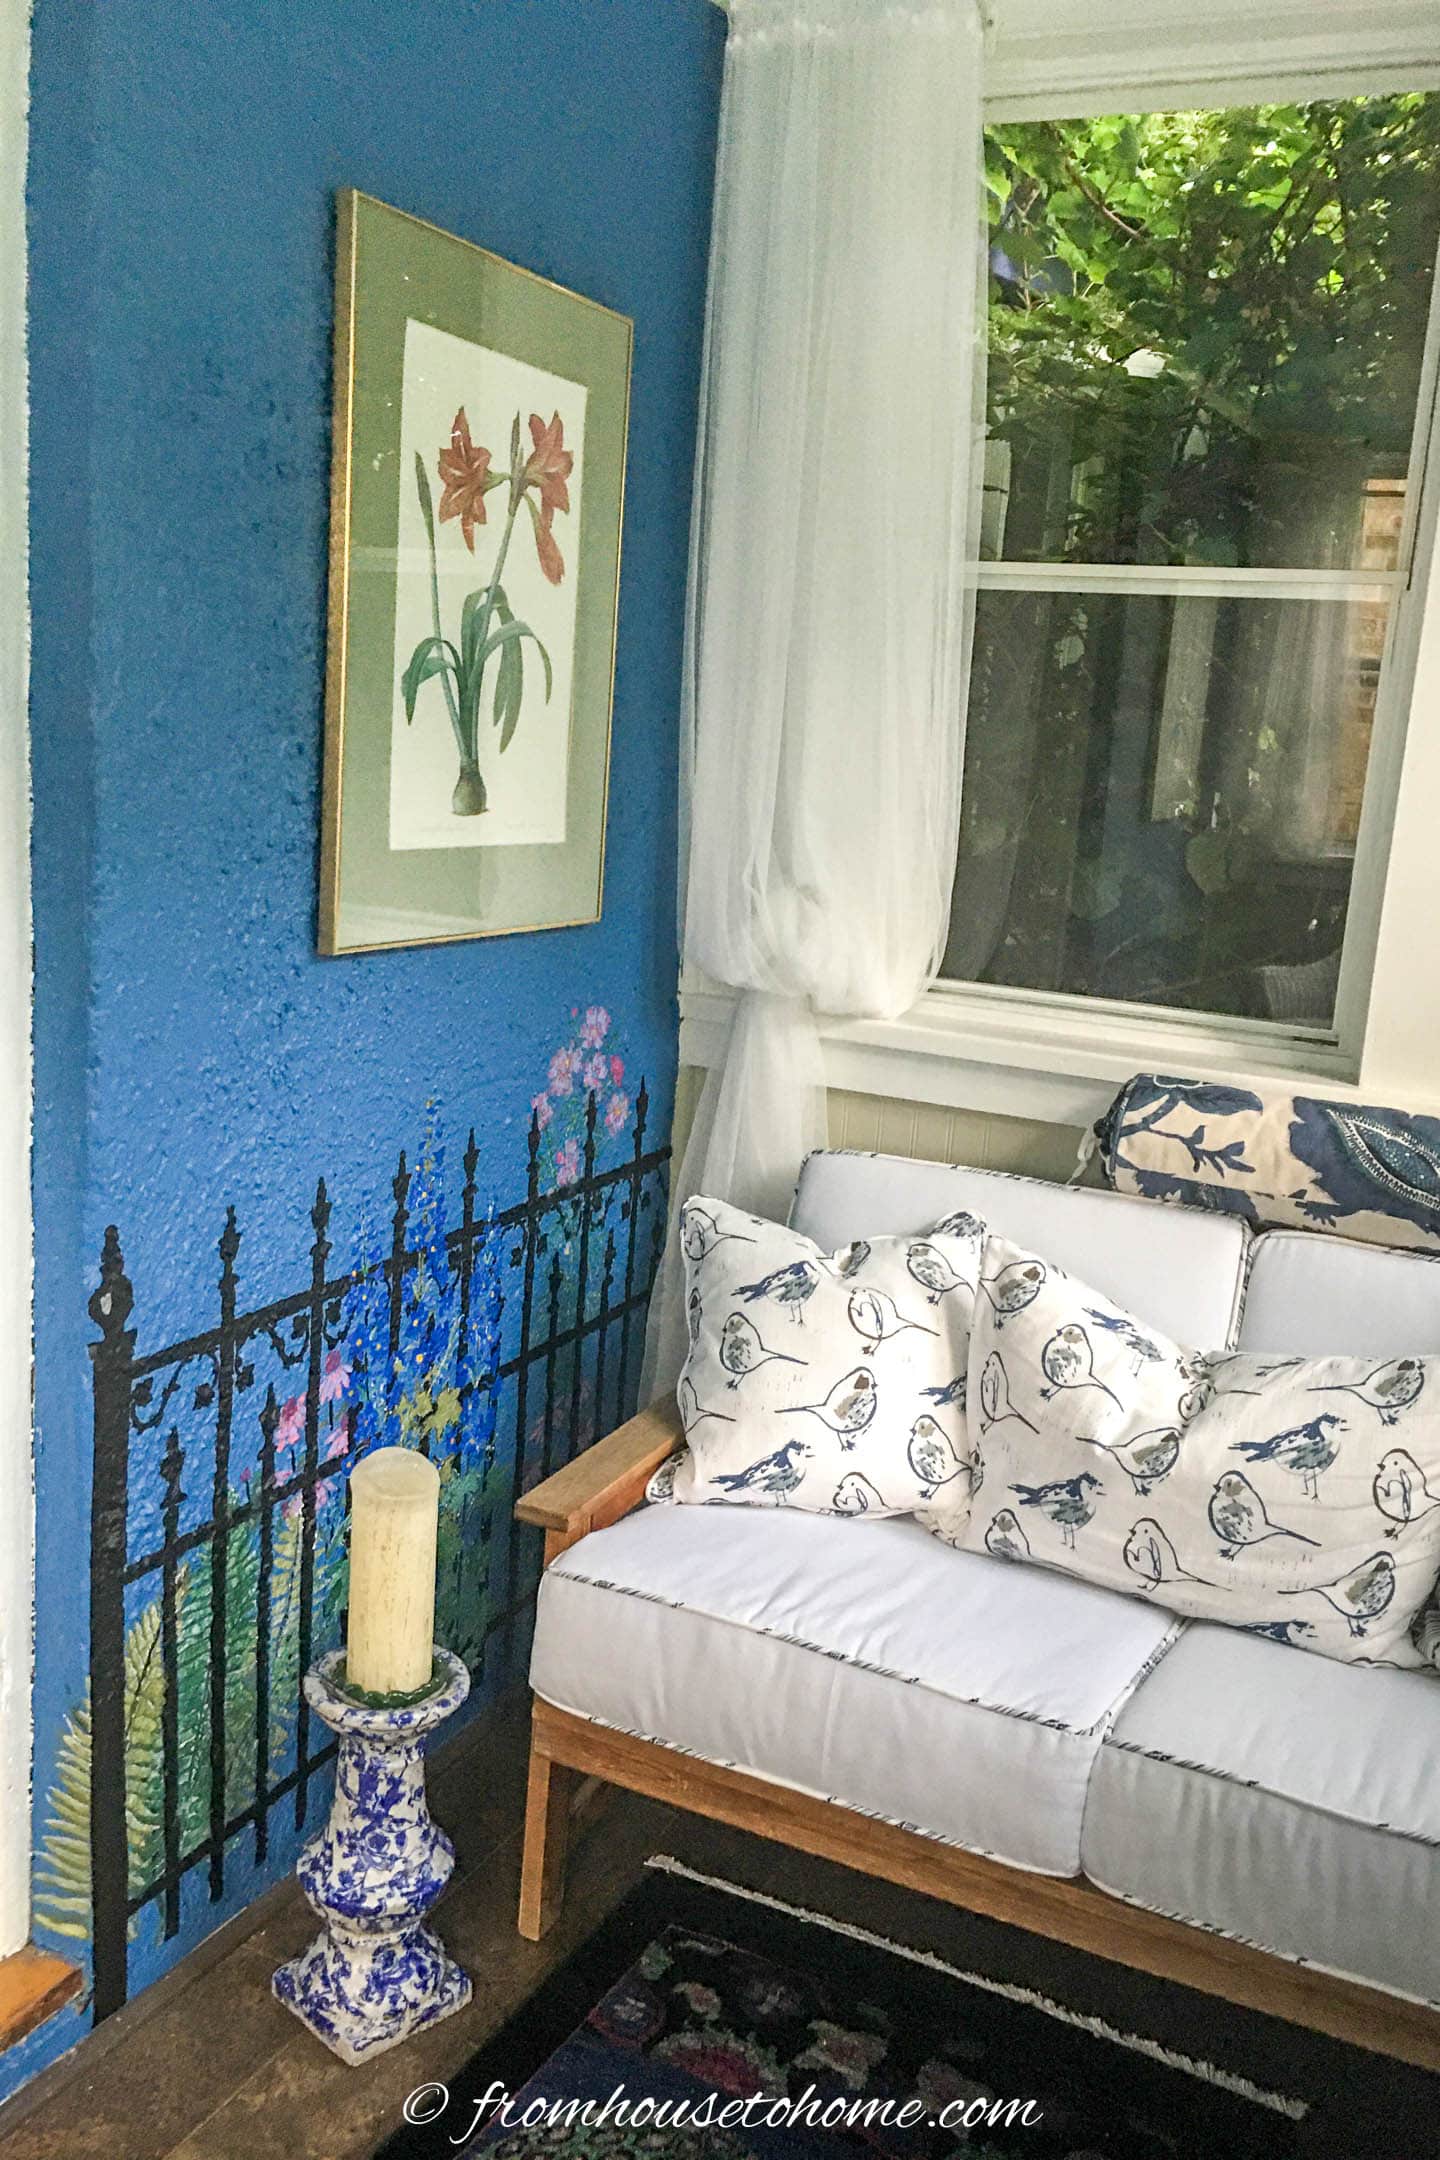 Blue and white front porch with a pine loveseat sofa, white curtains, and a blue wall with a stenciled garden